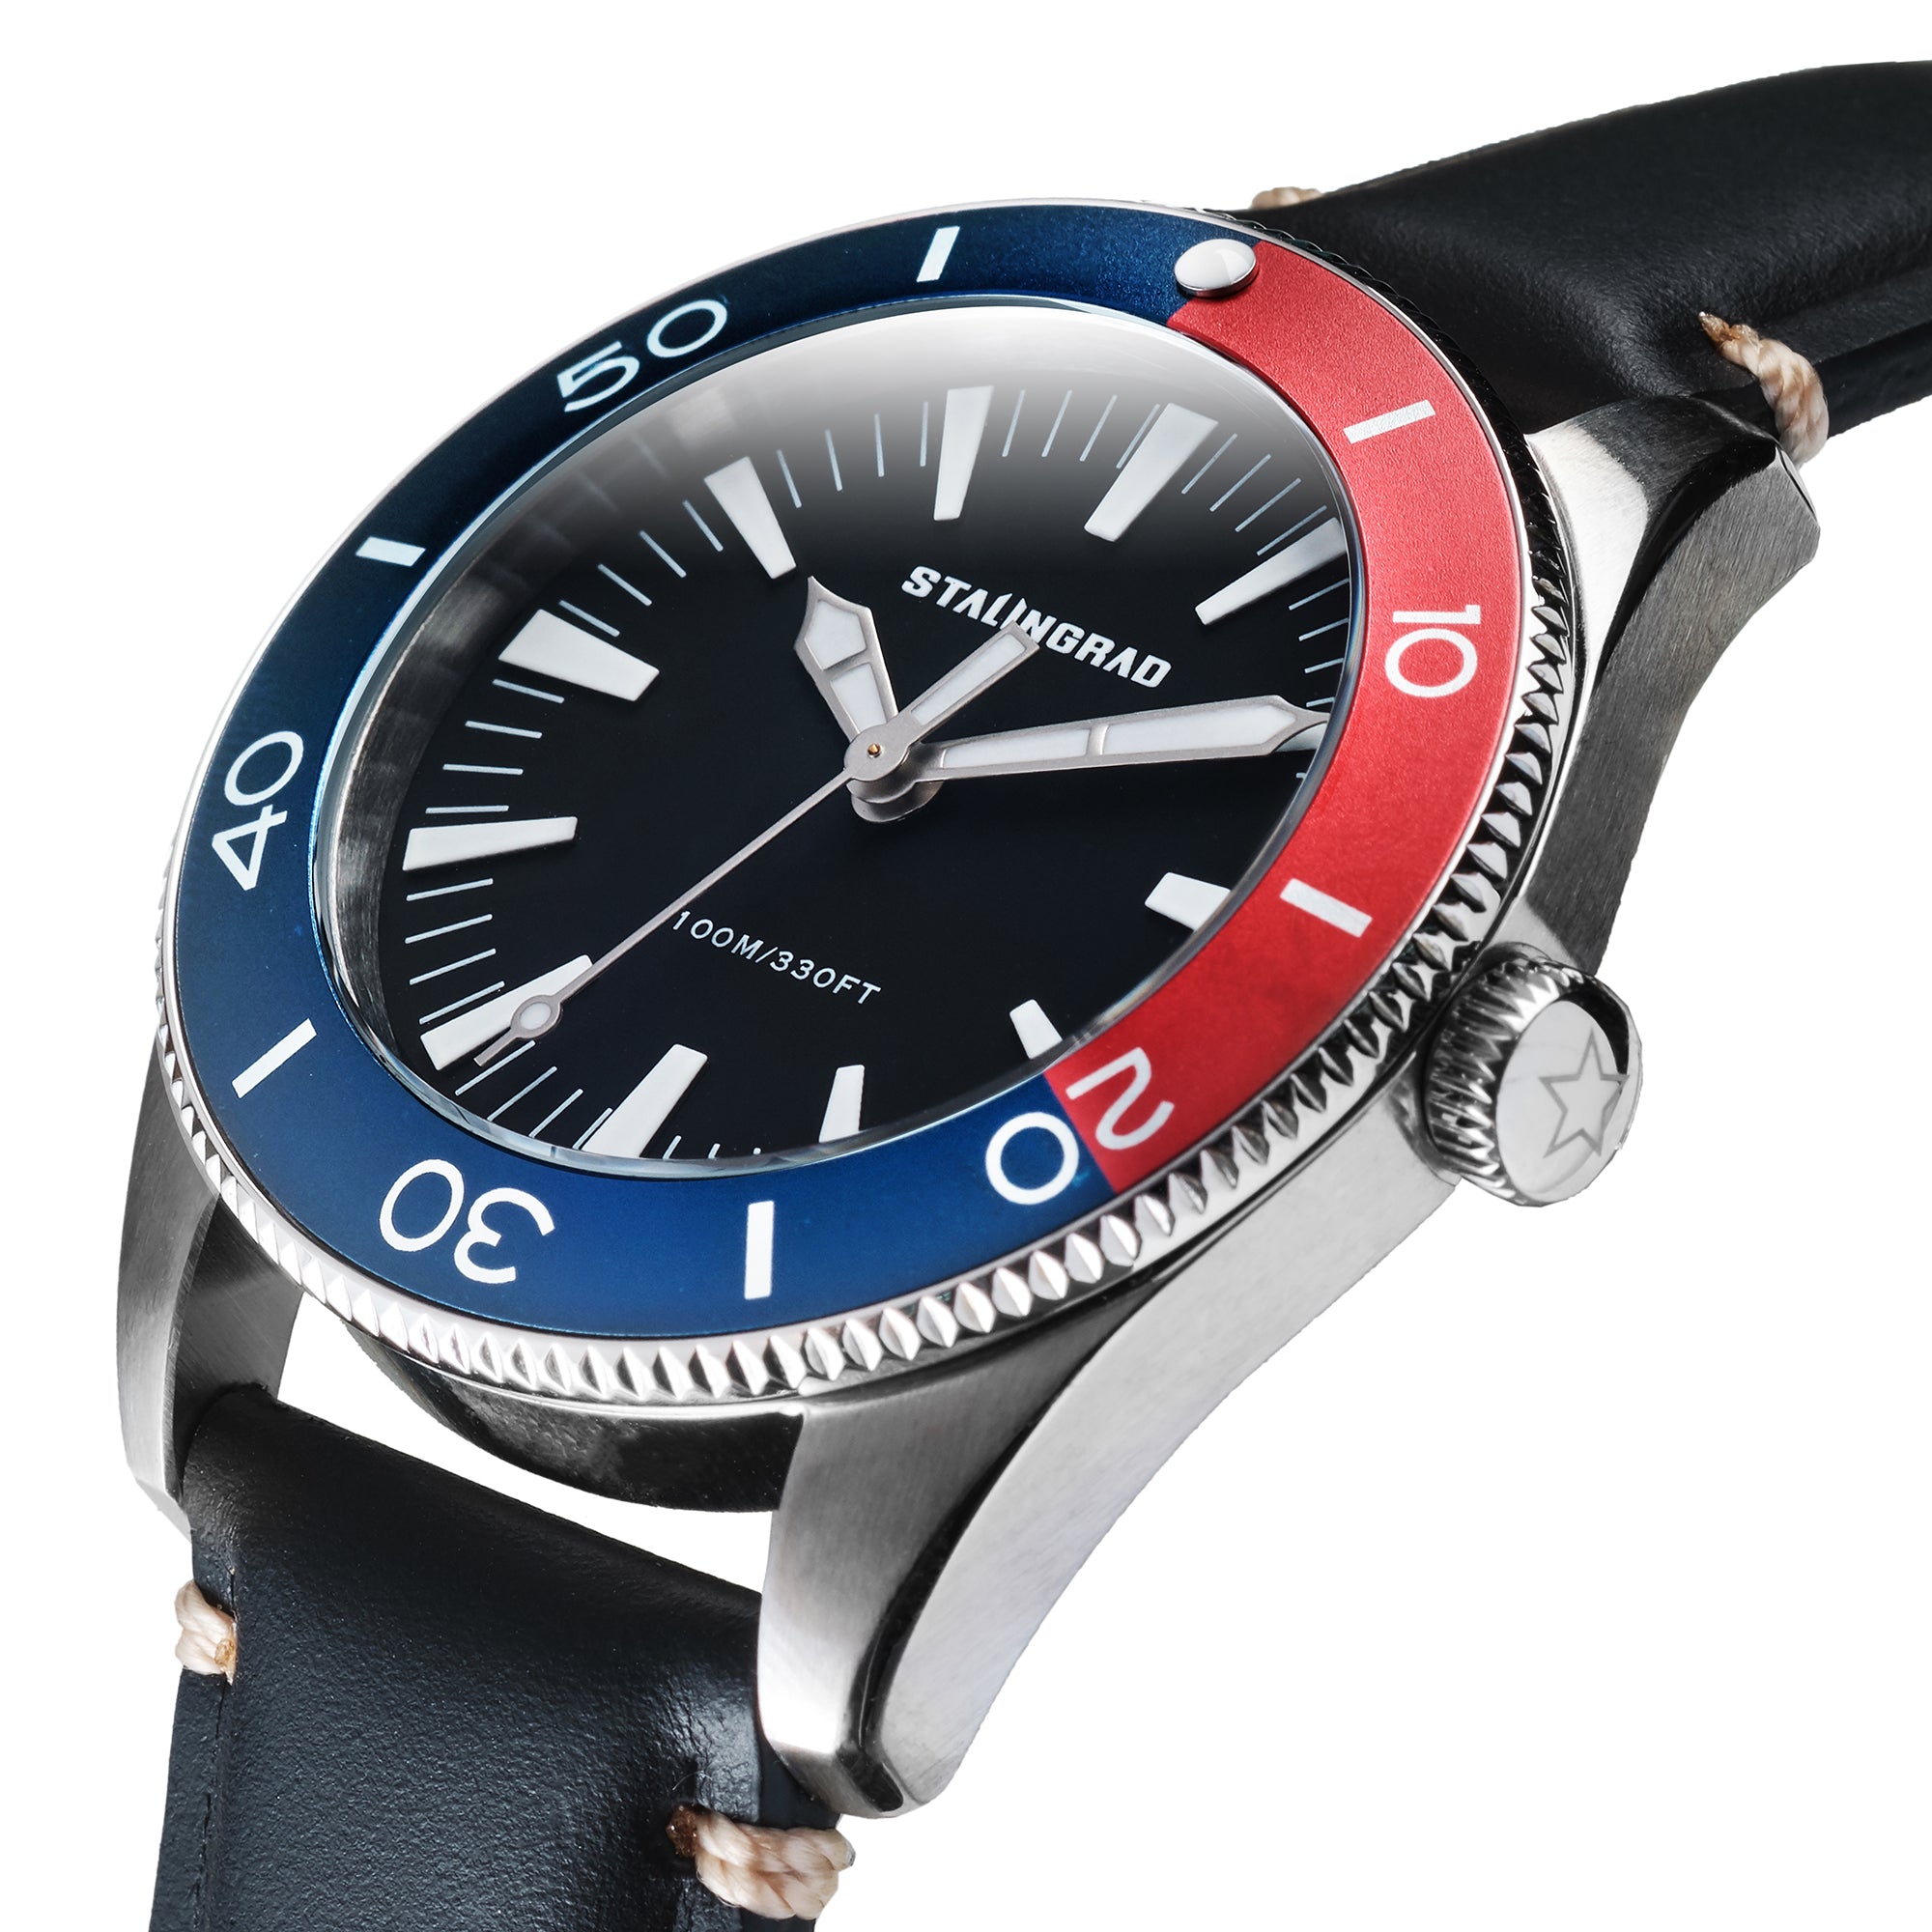 Stalingrad Iron Will Watch Black Dial, with Blue and Red 2 tone Bezel and a black leather strap on a white background, diagonal view